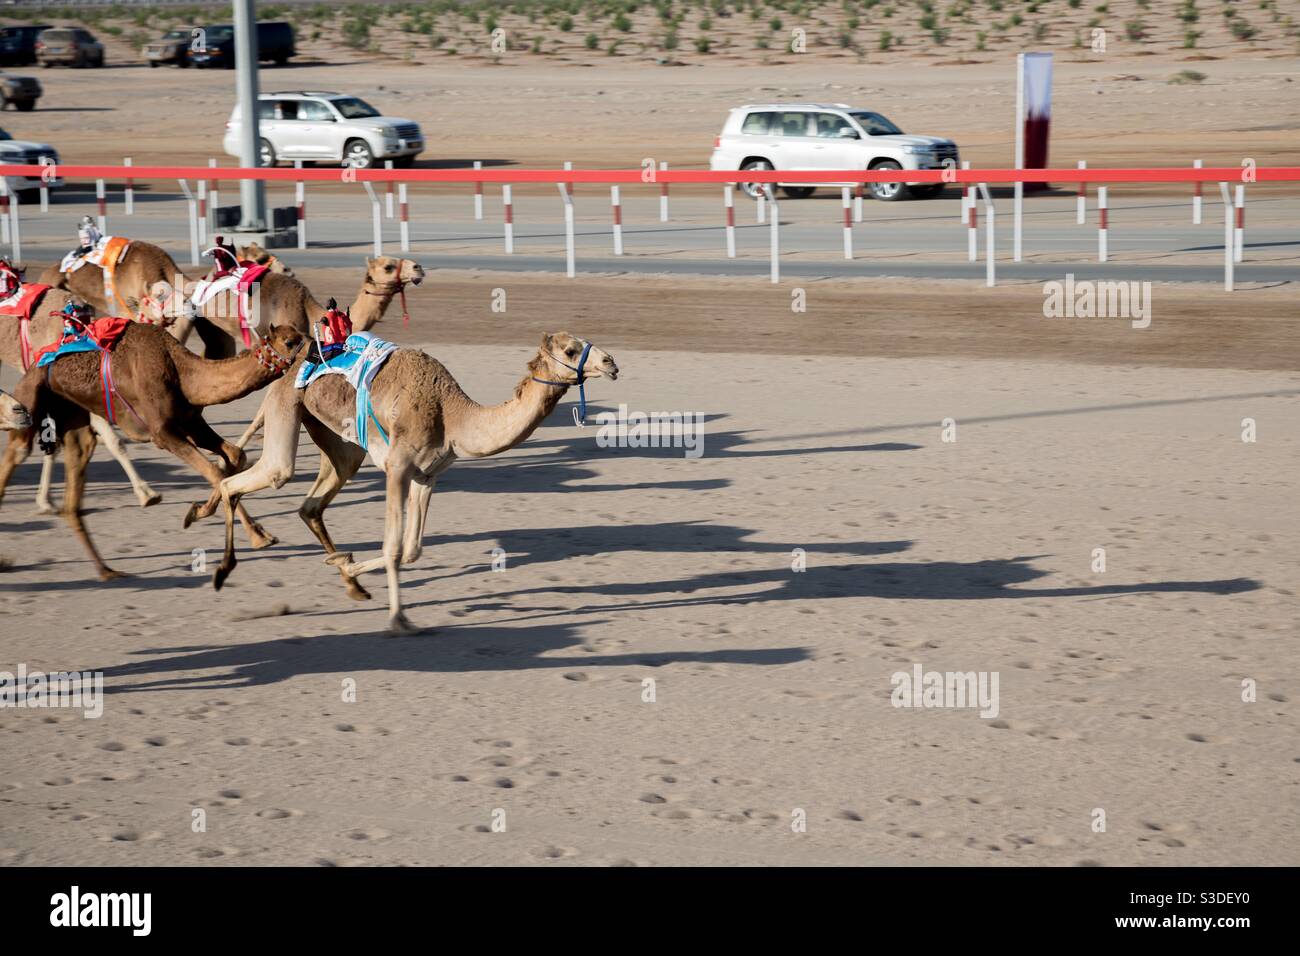 Al Bashair Camel Race: Feb.2021 Adam, Oman.The race brings the best of regional camels from Saudi Arabia,Qatar,UAE,and Oman.various age groups of camels compete in 6day event. Robot driven. Stock Photo